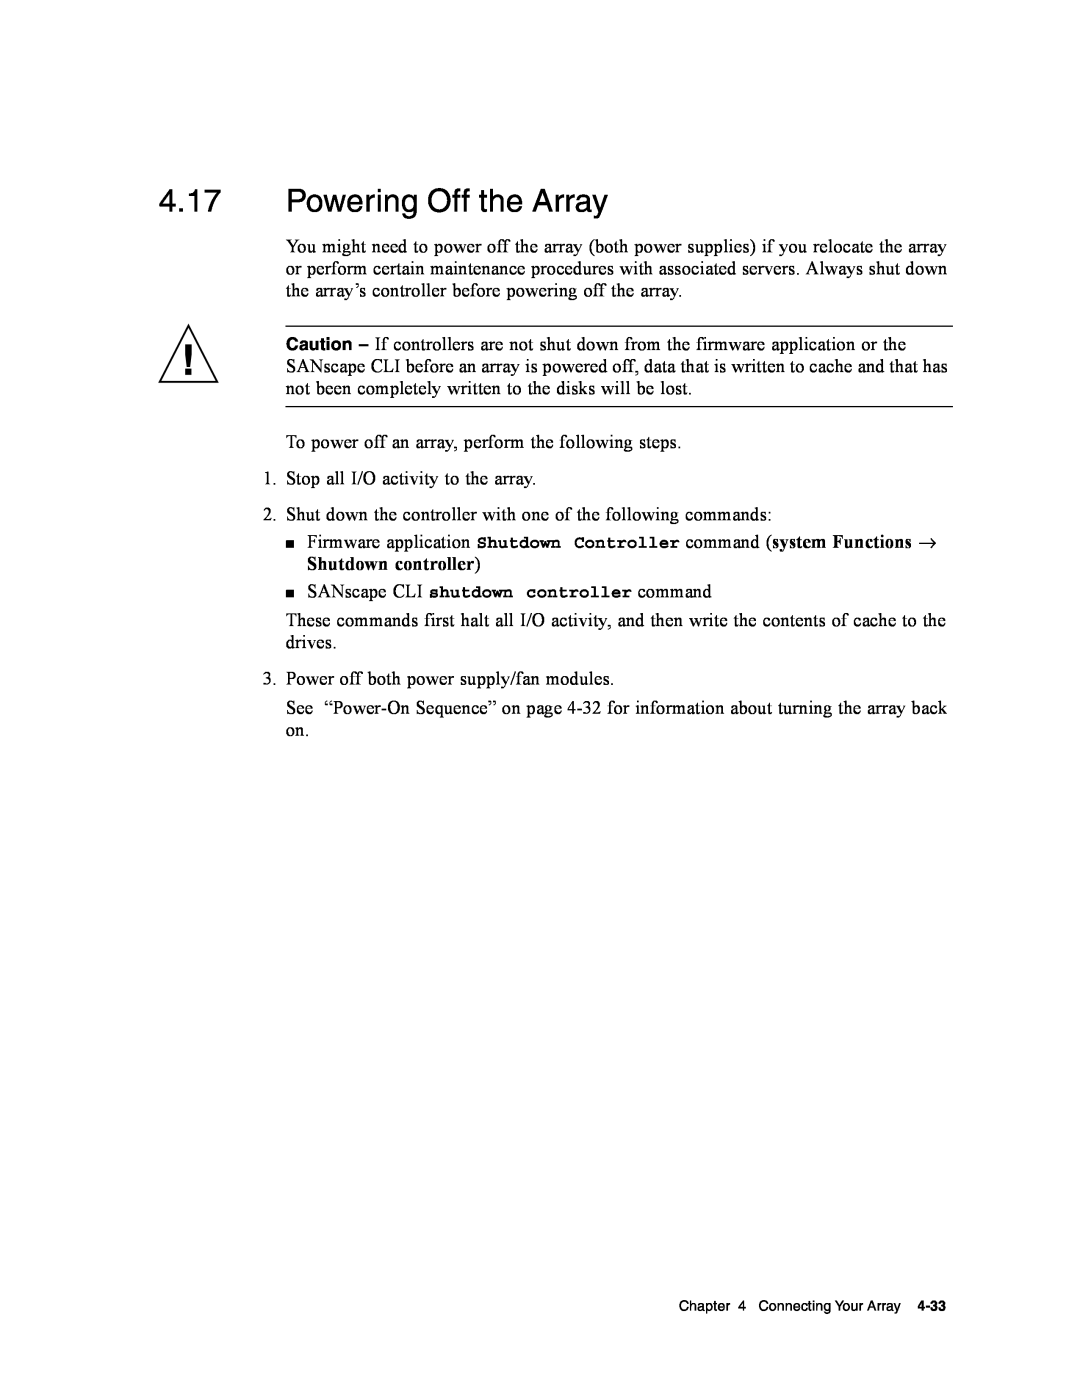 Dot Hill Systems II 200 FC service manual Powering Off the Array 